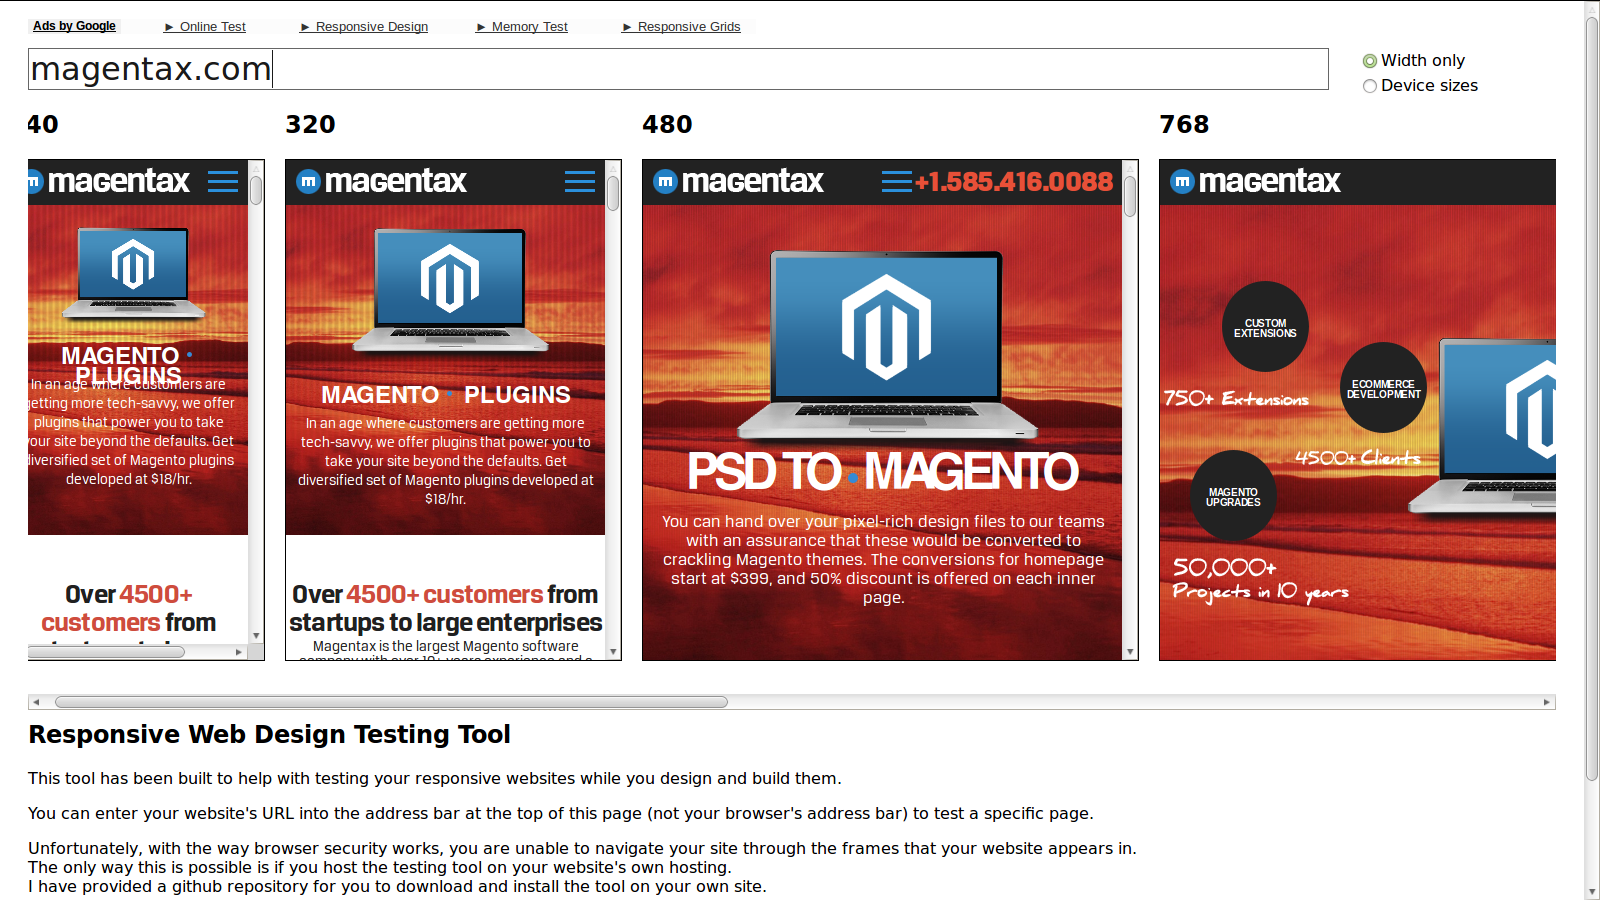 responsive web design tool: 15 Best Testing Tools For Evaluating Your Website Responsiveness